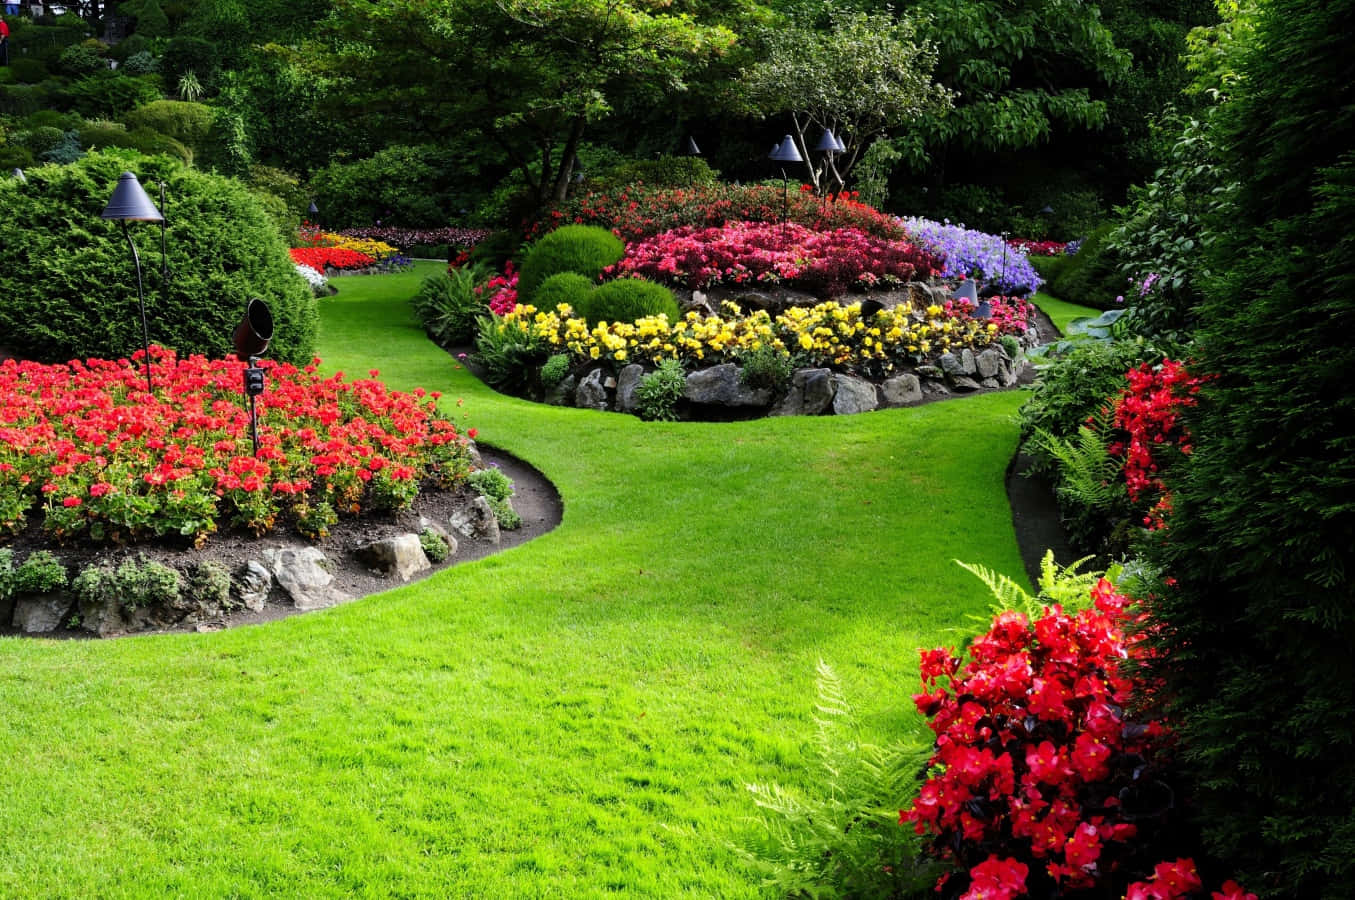 Experience the wonders of nature in this beautiful garden